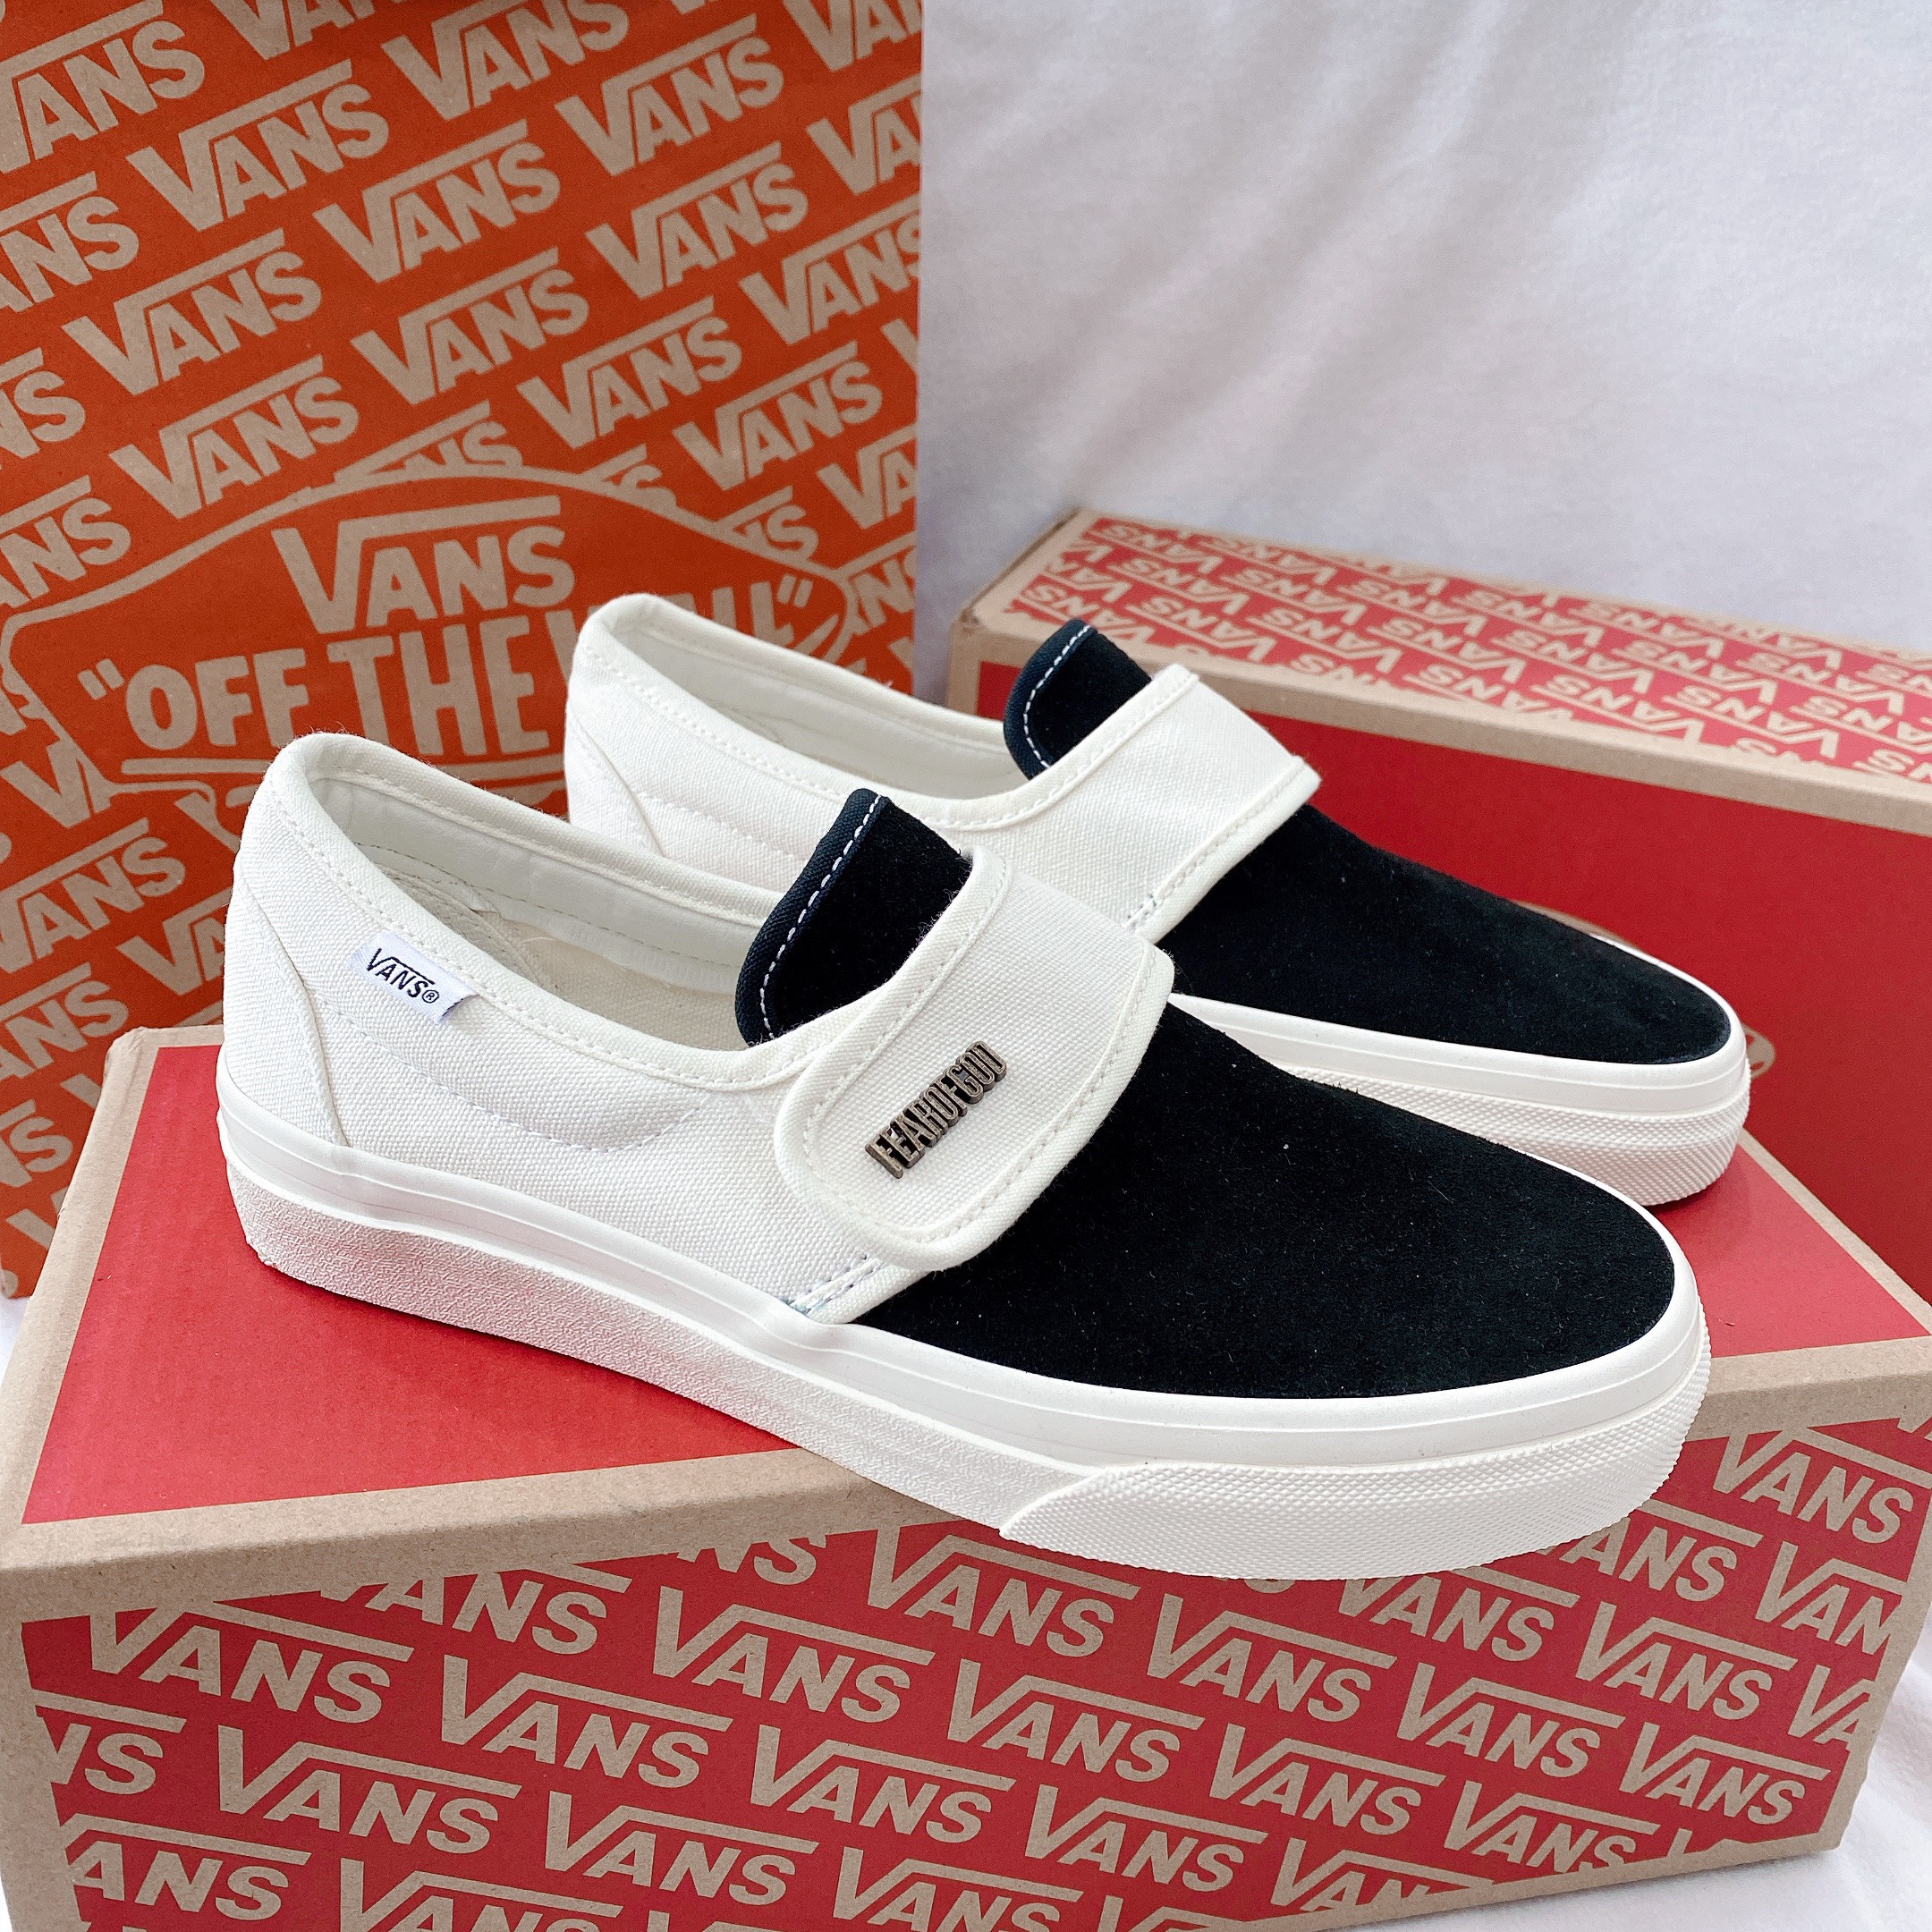 vans x Fear of god black and white like auth 2